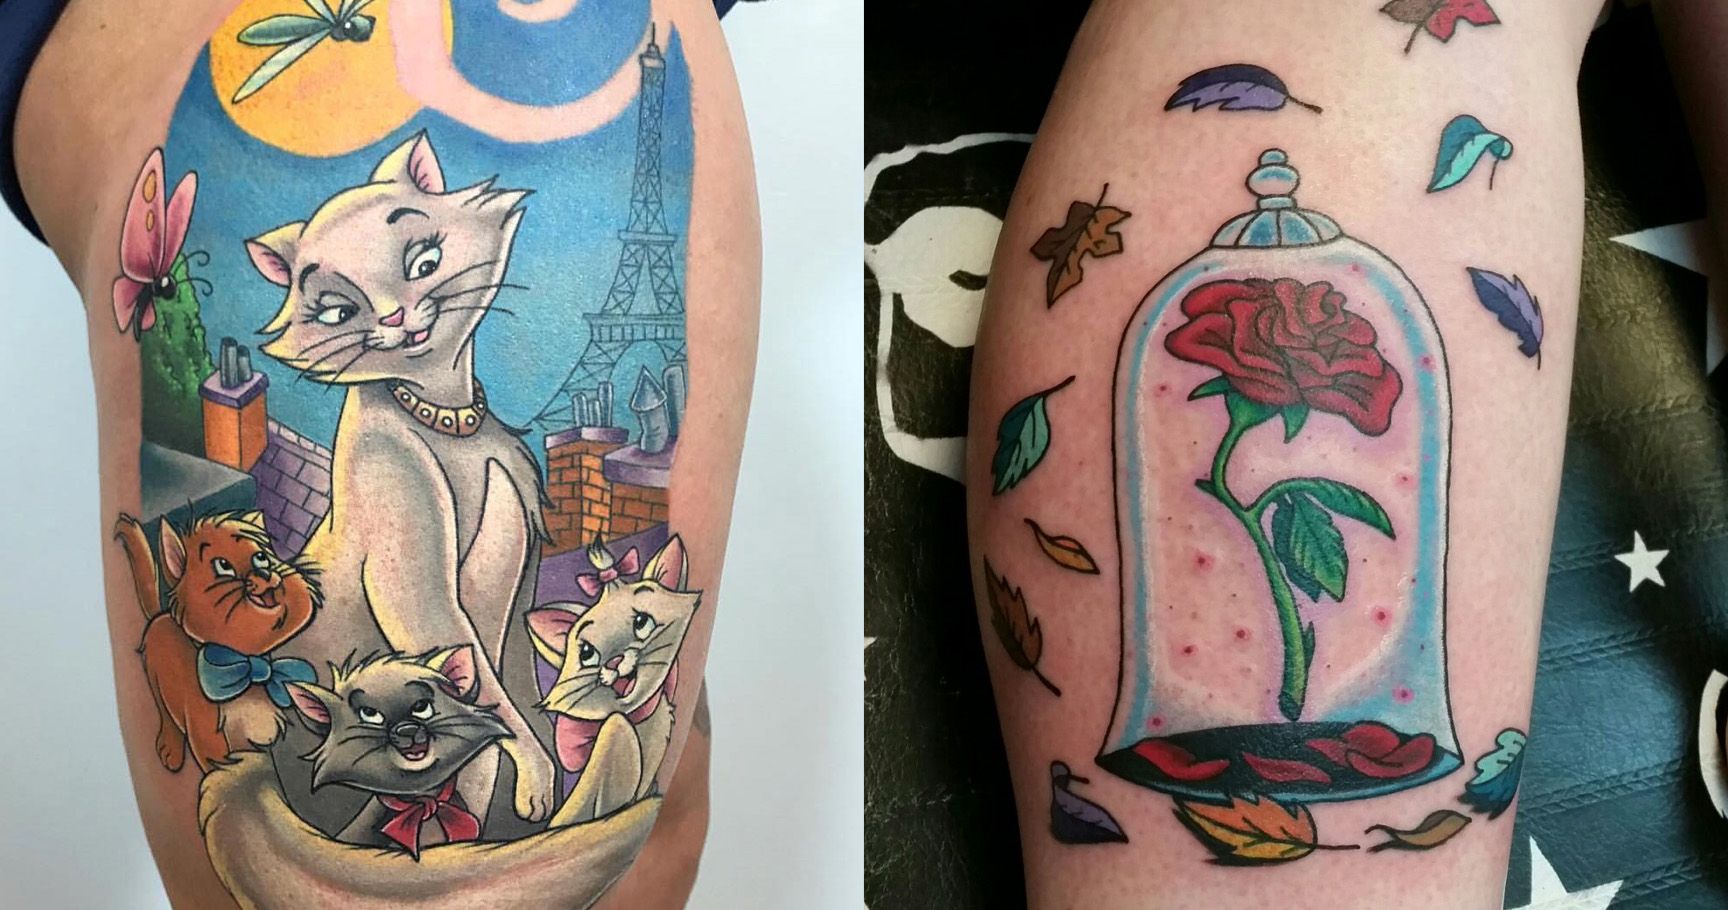 15 Amazing Disney Tattoos That Will Make You Want To Hit The Parlor Stat